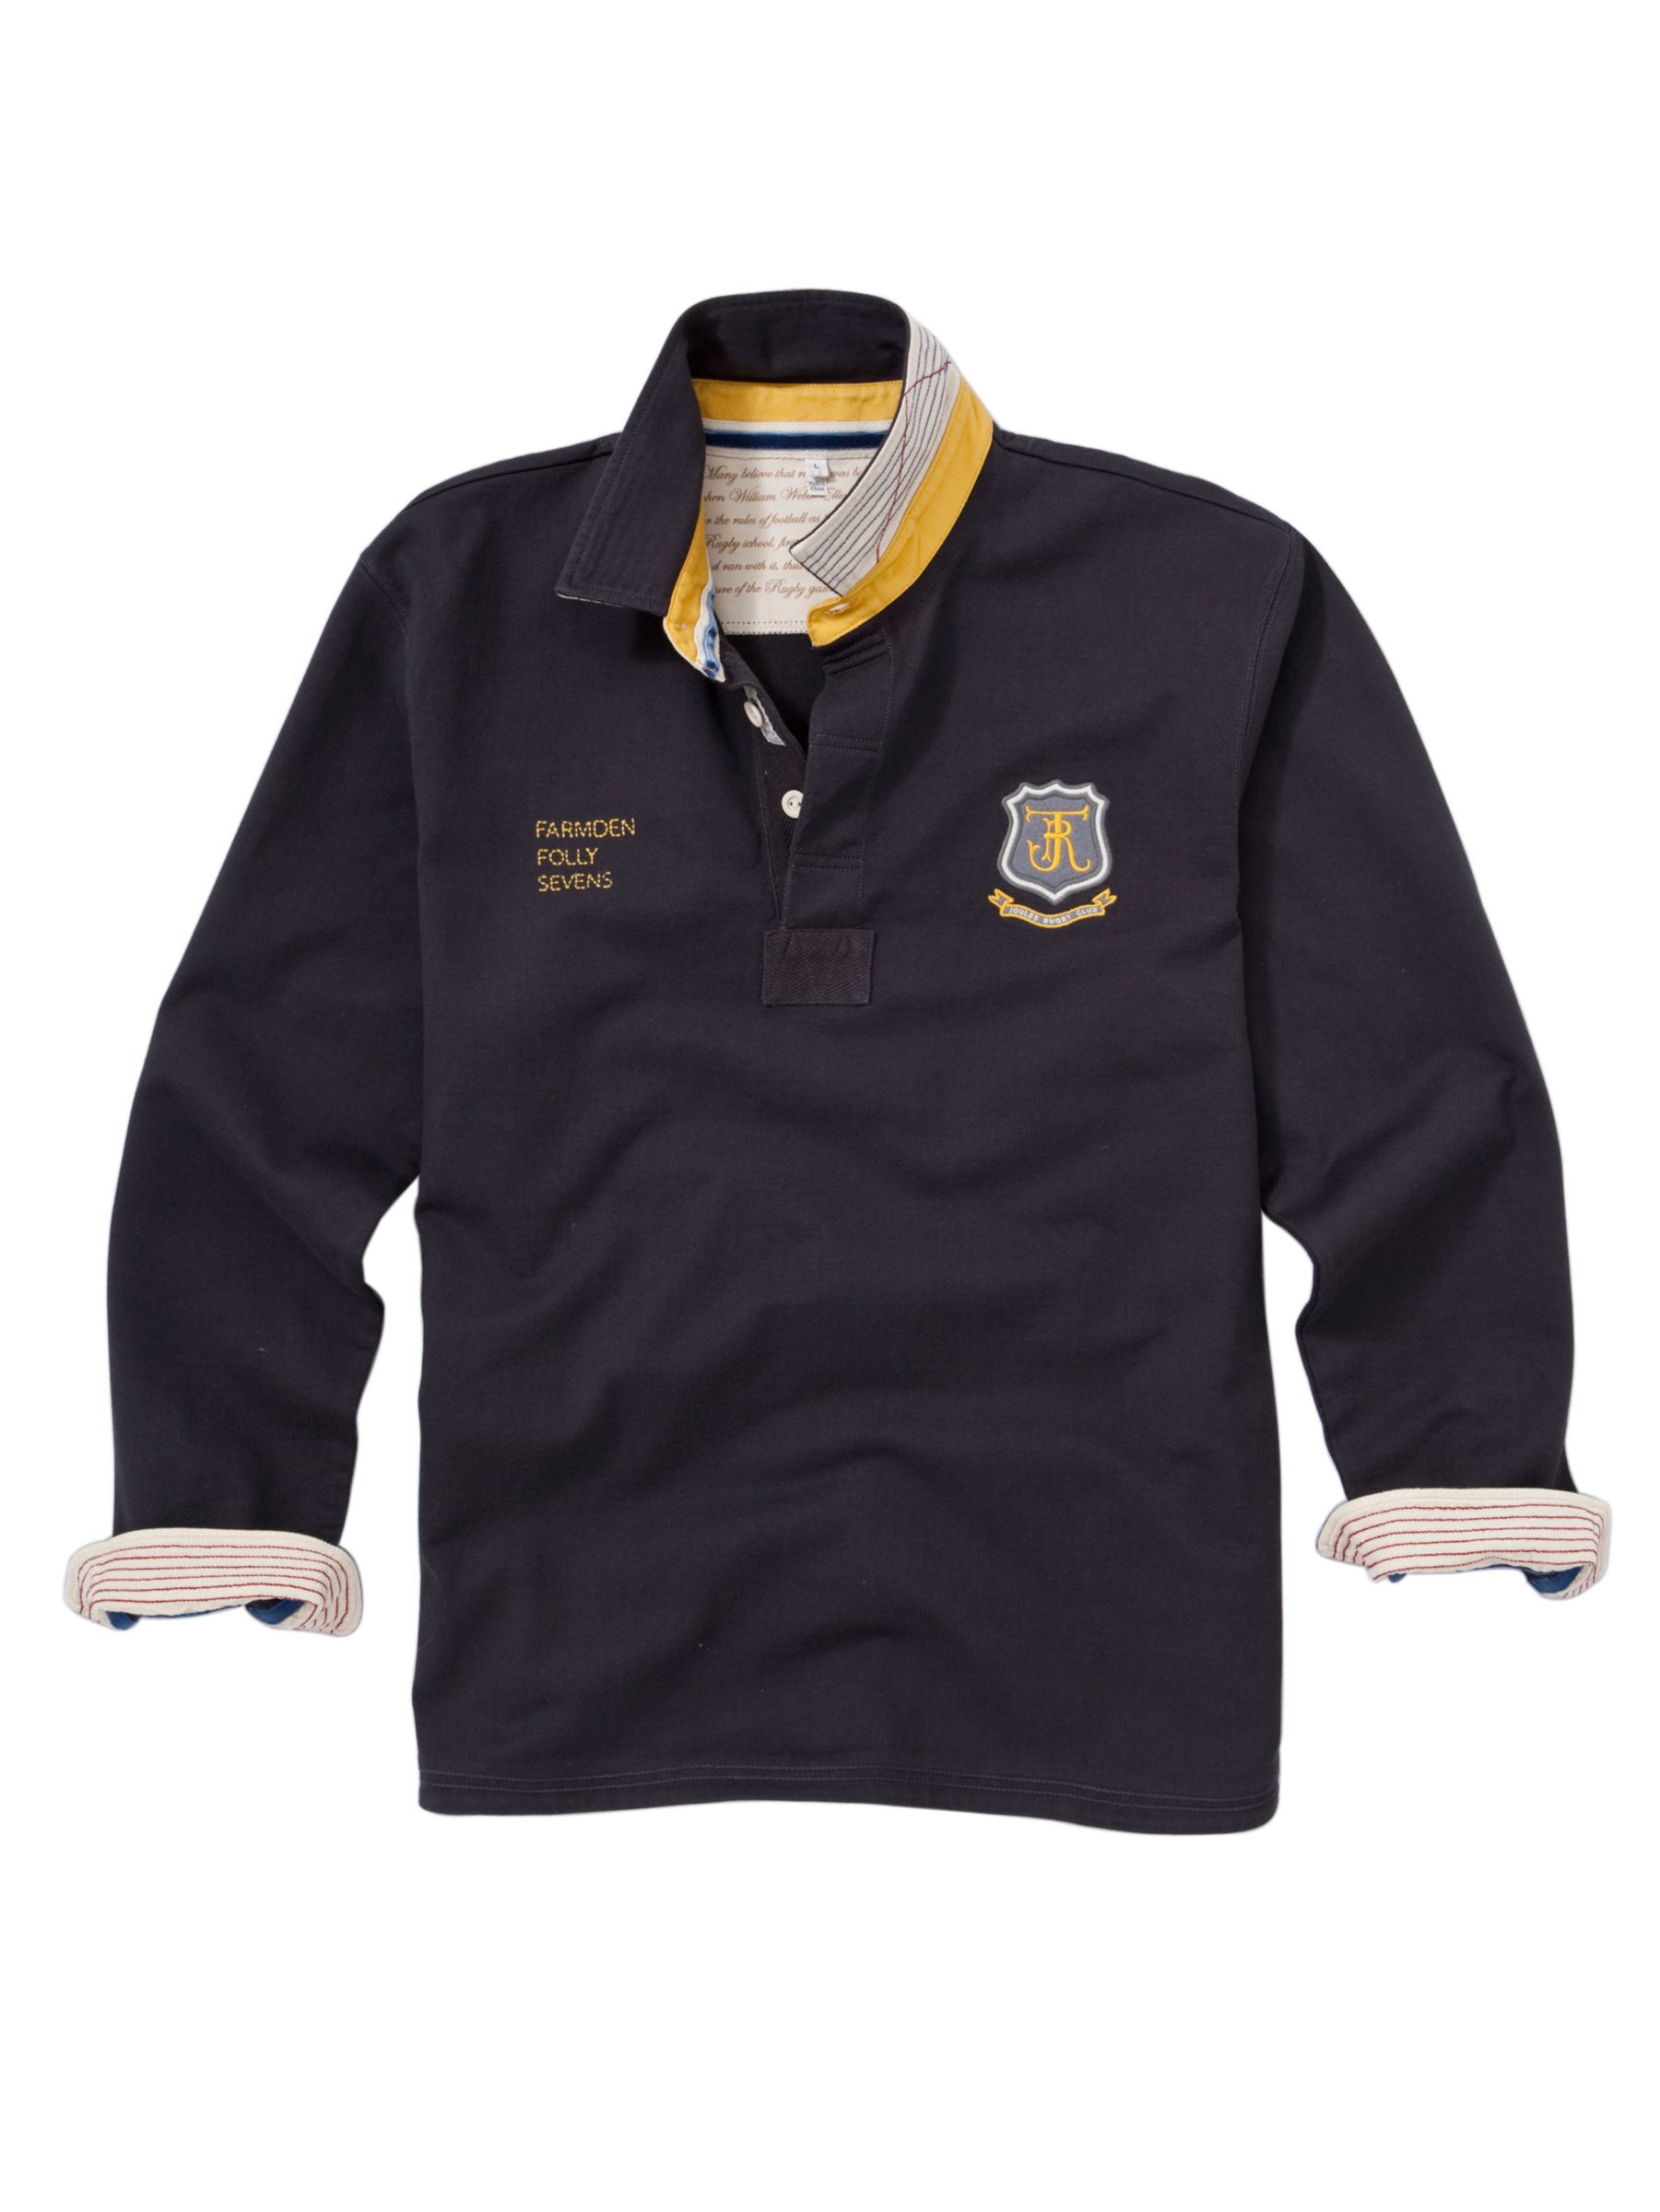 Camber Long Sleeve Rugby Shirt, Coal Grey